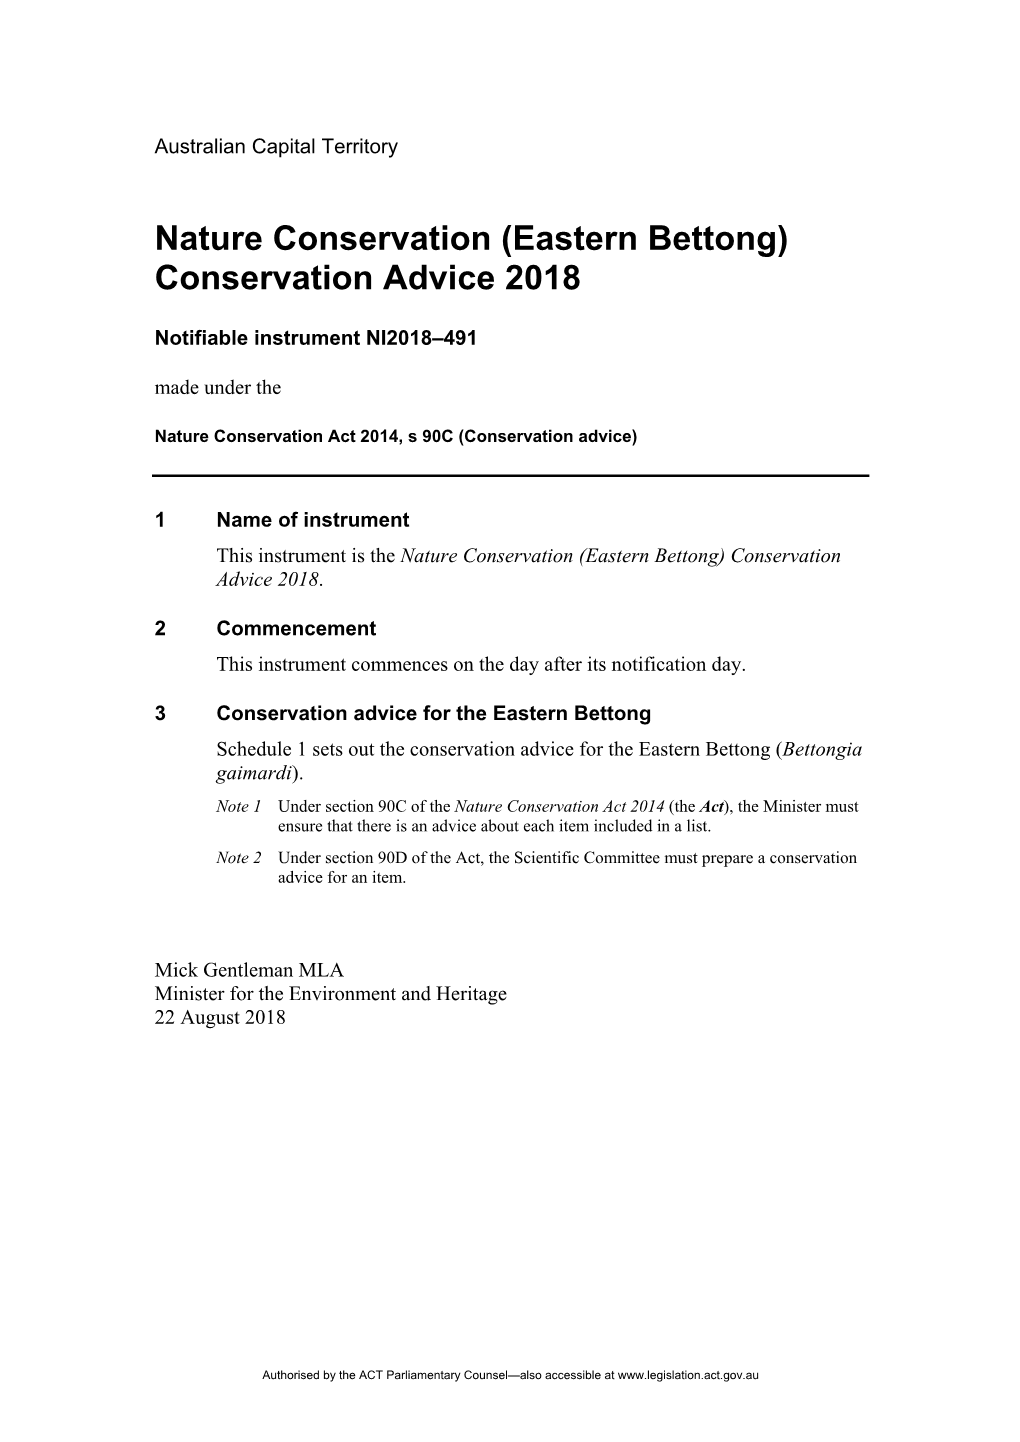 (Eastern Bettong) Conservation Advice 2018